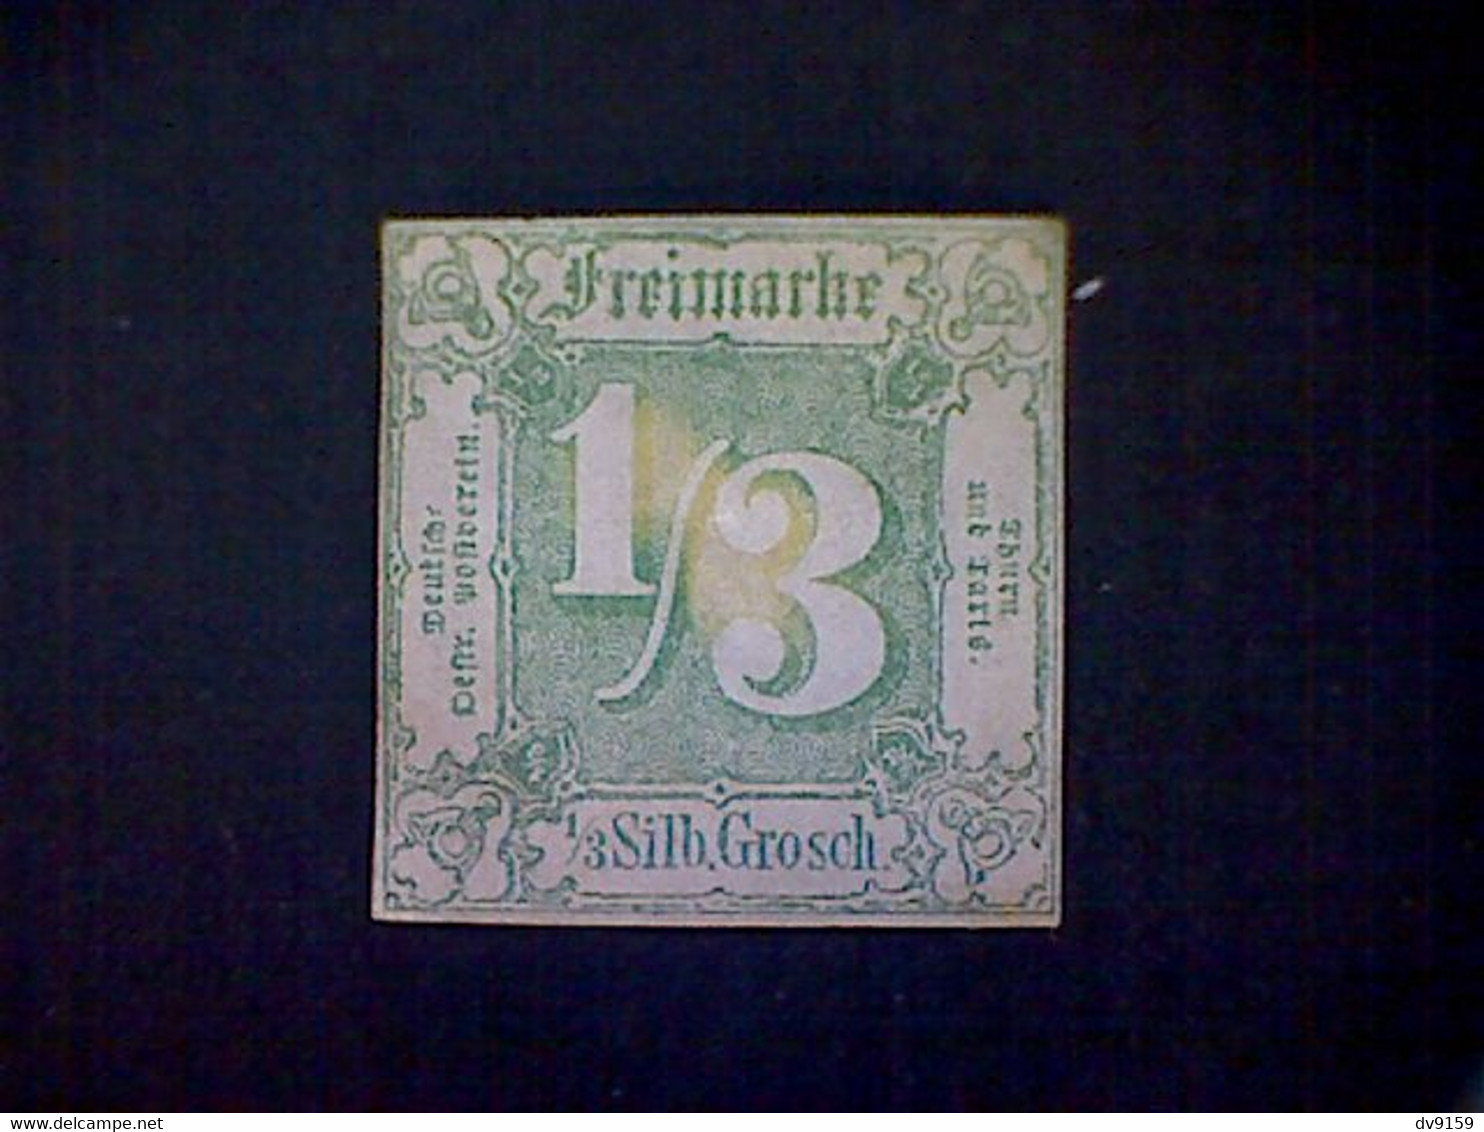 Germany (Thurn And Taxis), Scott #16, 1863, Mint (*), No Gum, 1/3 Sgr, Green - Mint